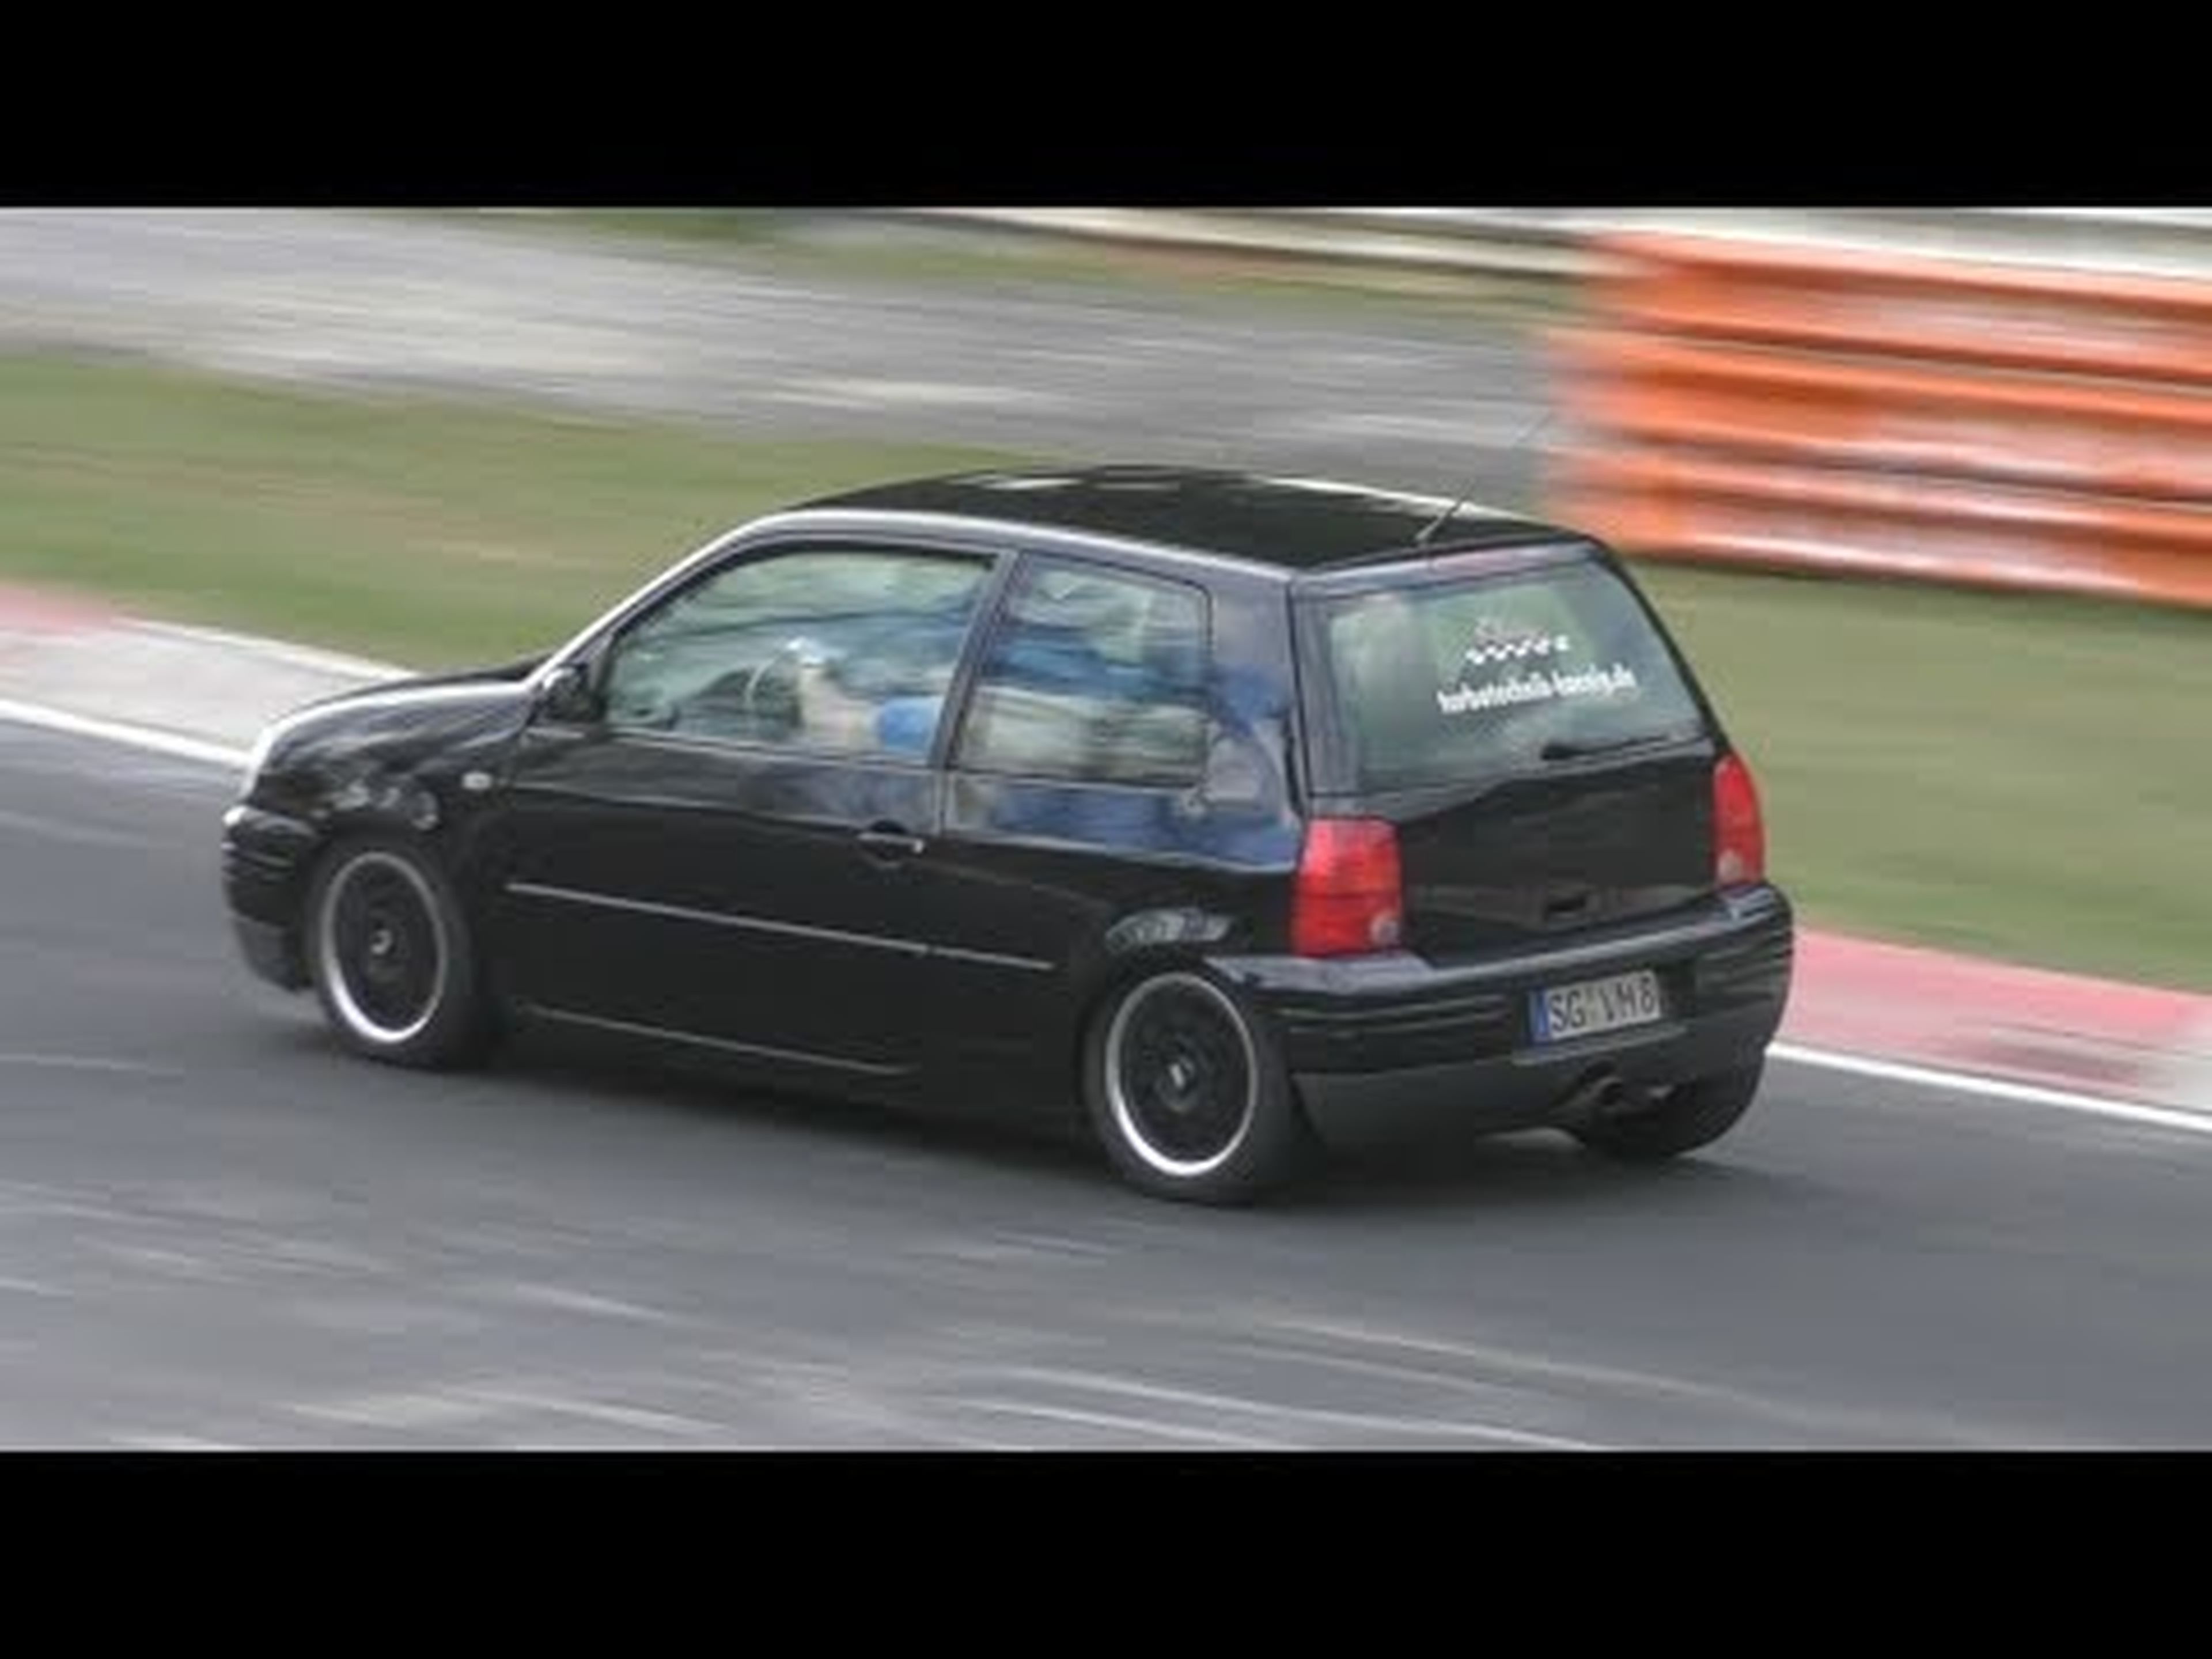 350HP Seat Arosa GT28 Turbo- Keeps up with Supercars!